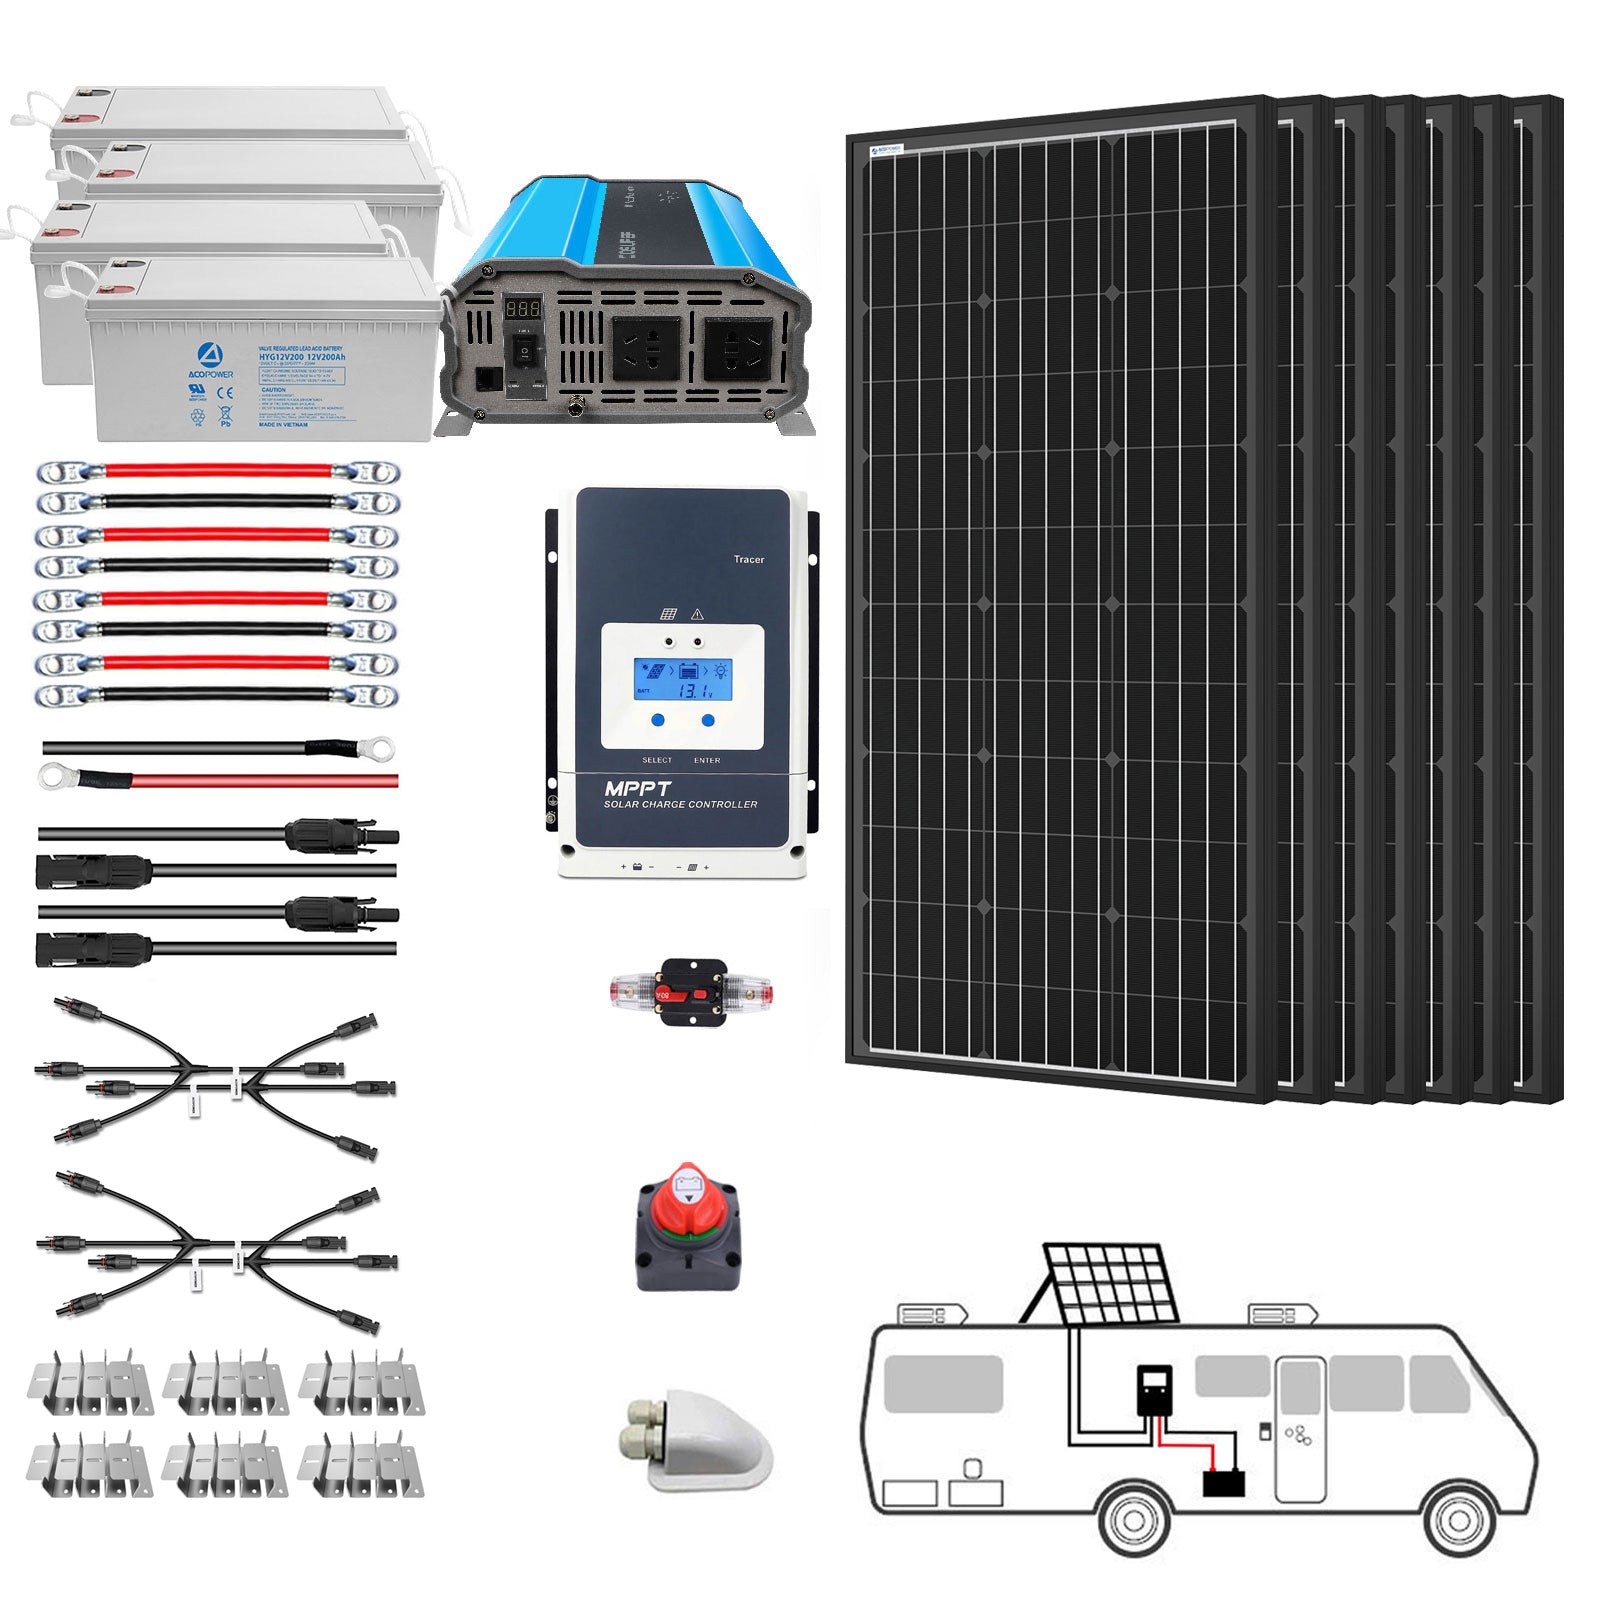 ACOPOWER Deep Cycle GEL Battery Mono Solar Power Complete System with Battery and Inverter for RV Boat 12V Off Grid Kit